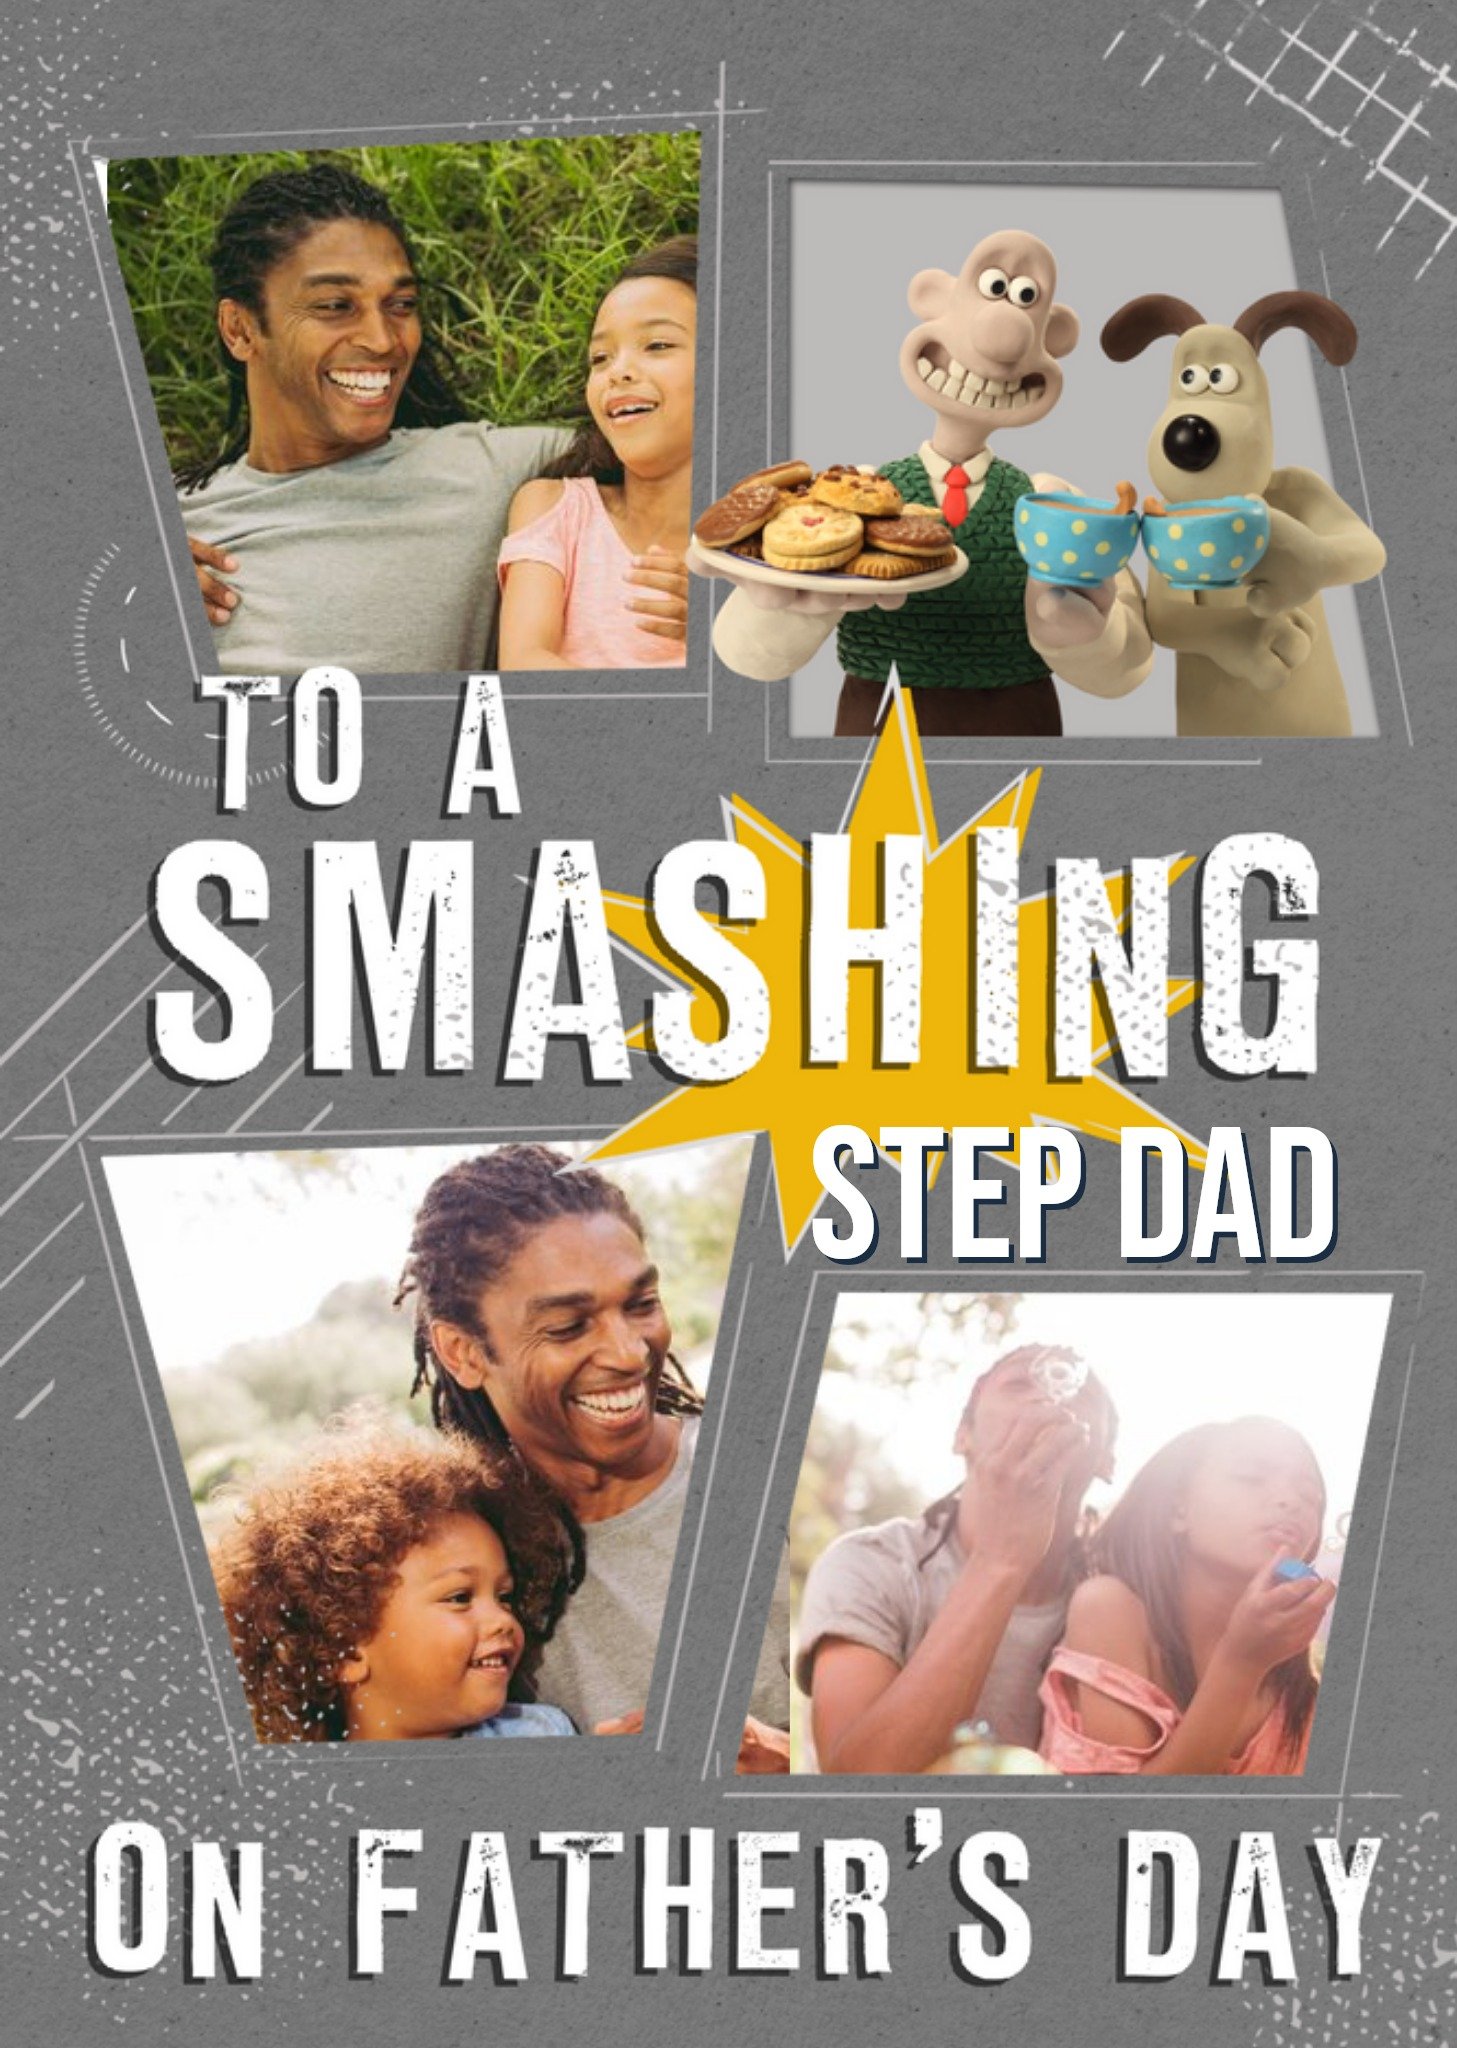 Wallace And Gromit To A Smashing Stepdad On Fathers Day Card, Large